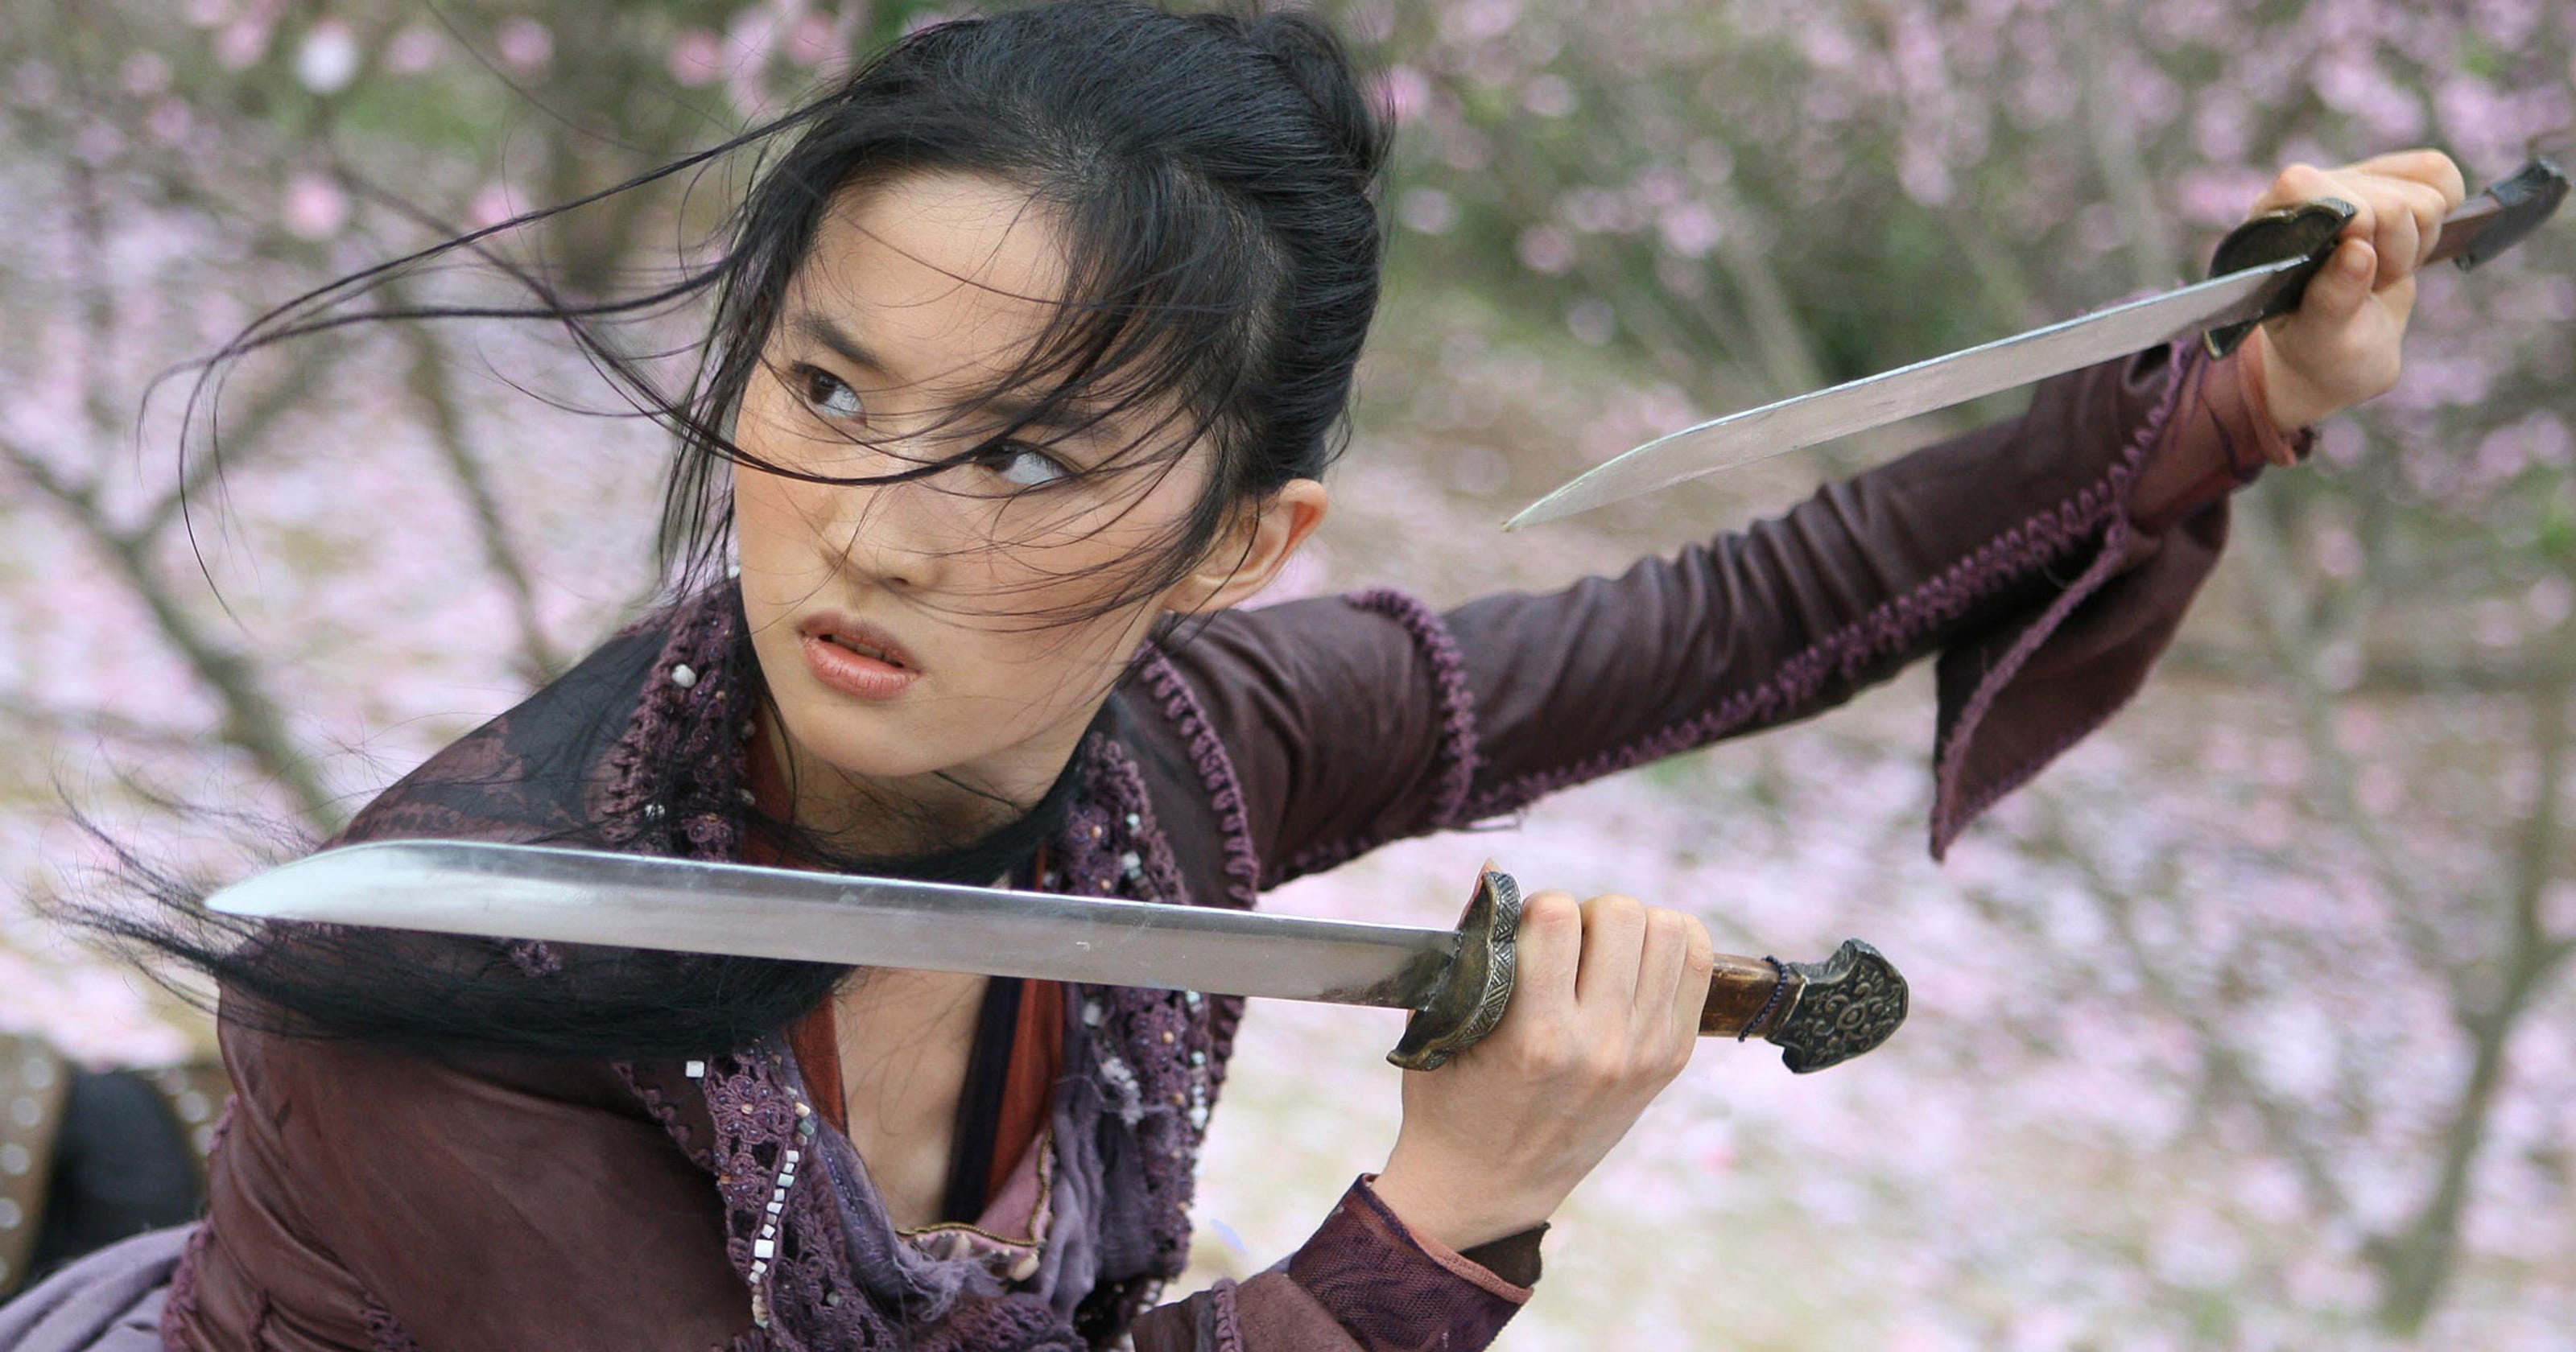 Mulan Gets Its Live Action Warrior Star With Liu Yifei Also Known As Crystal Liu